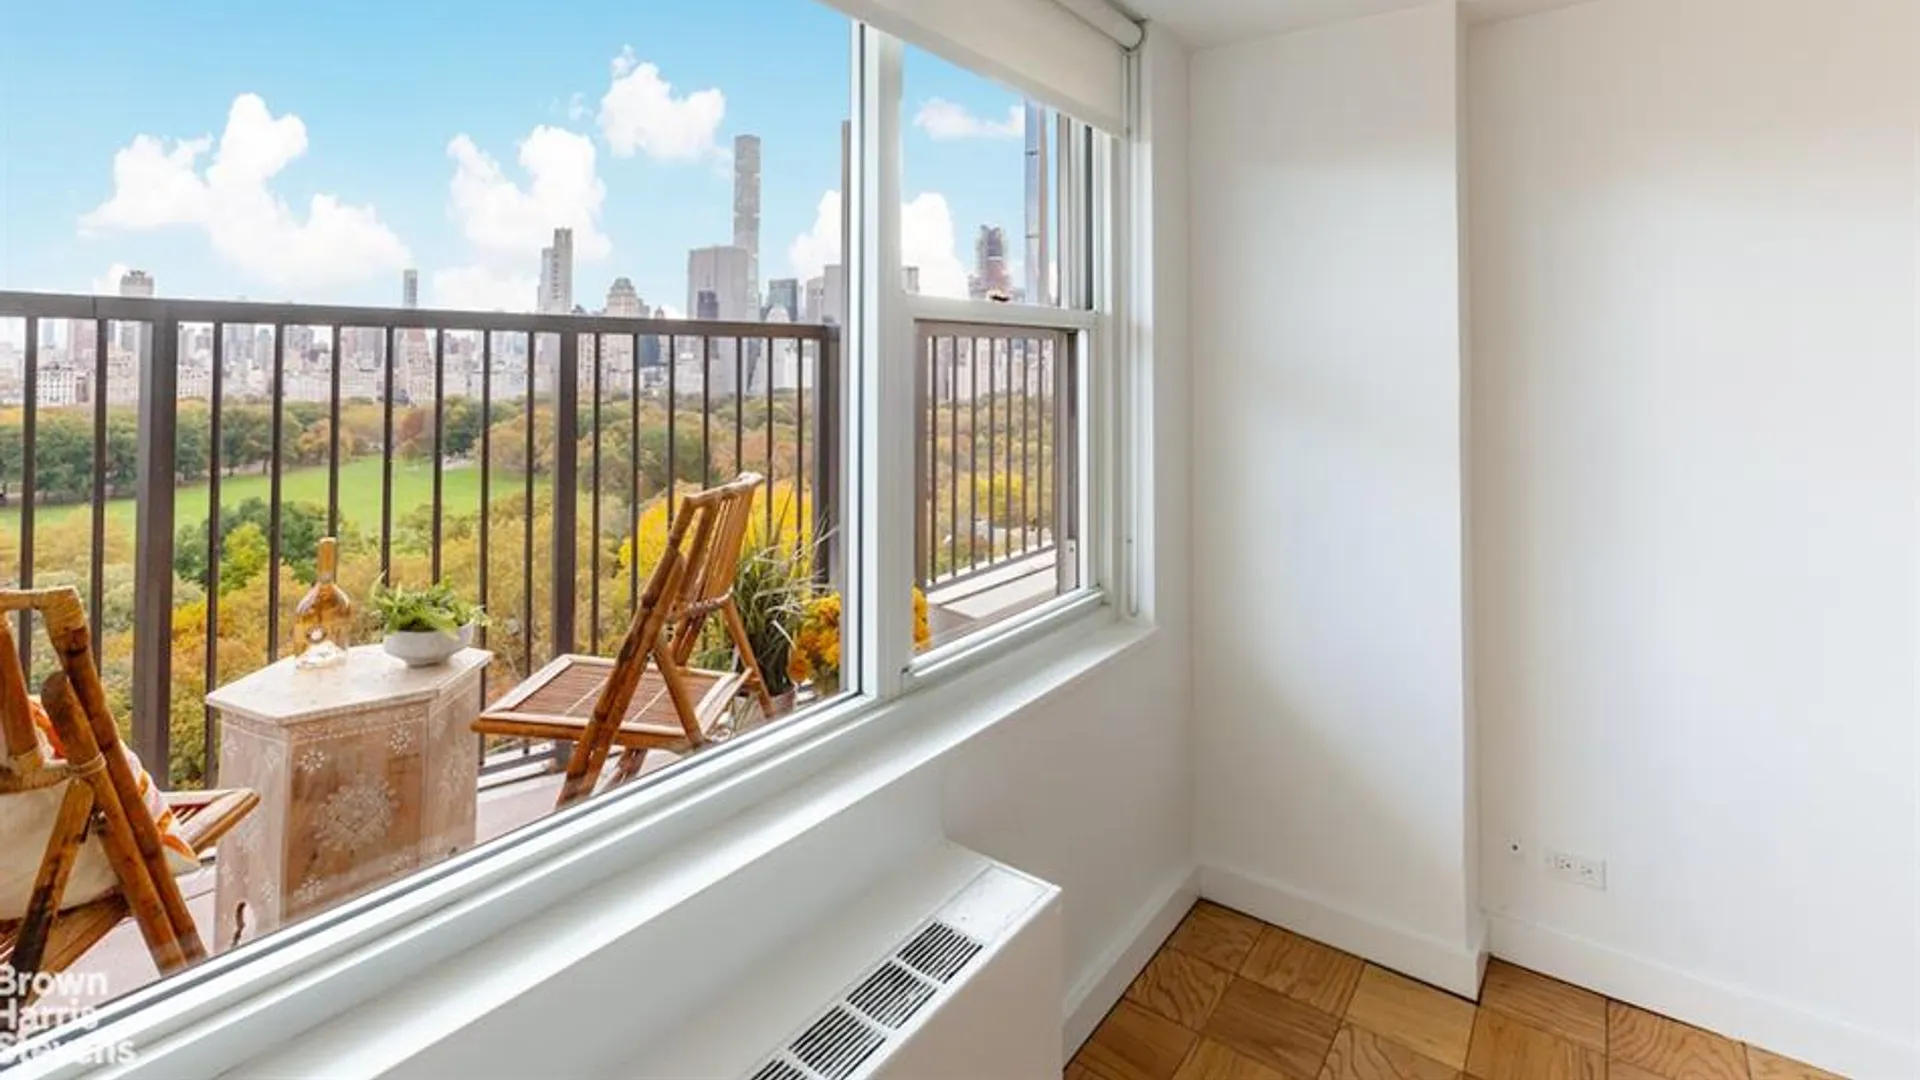 80 CENTRAL PARK WEST 18A in New York | Studio apartment for sale ...